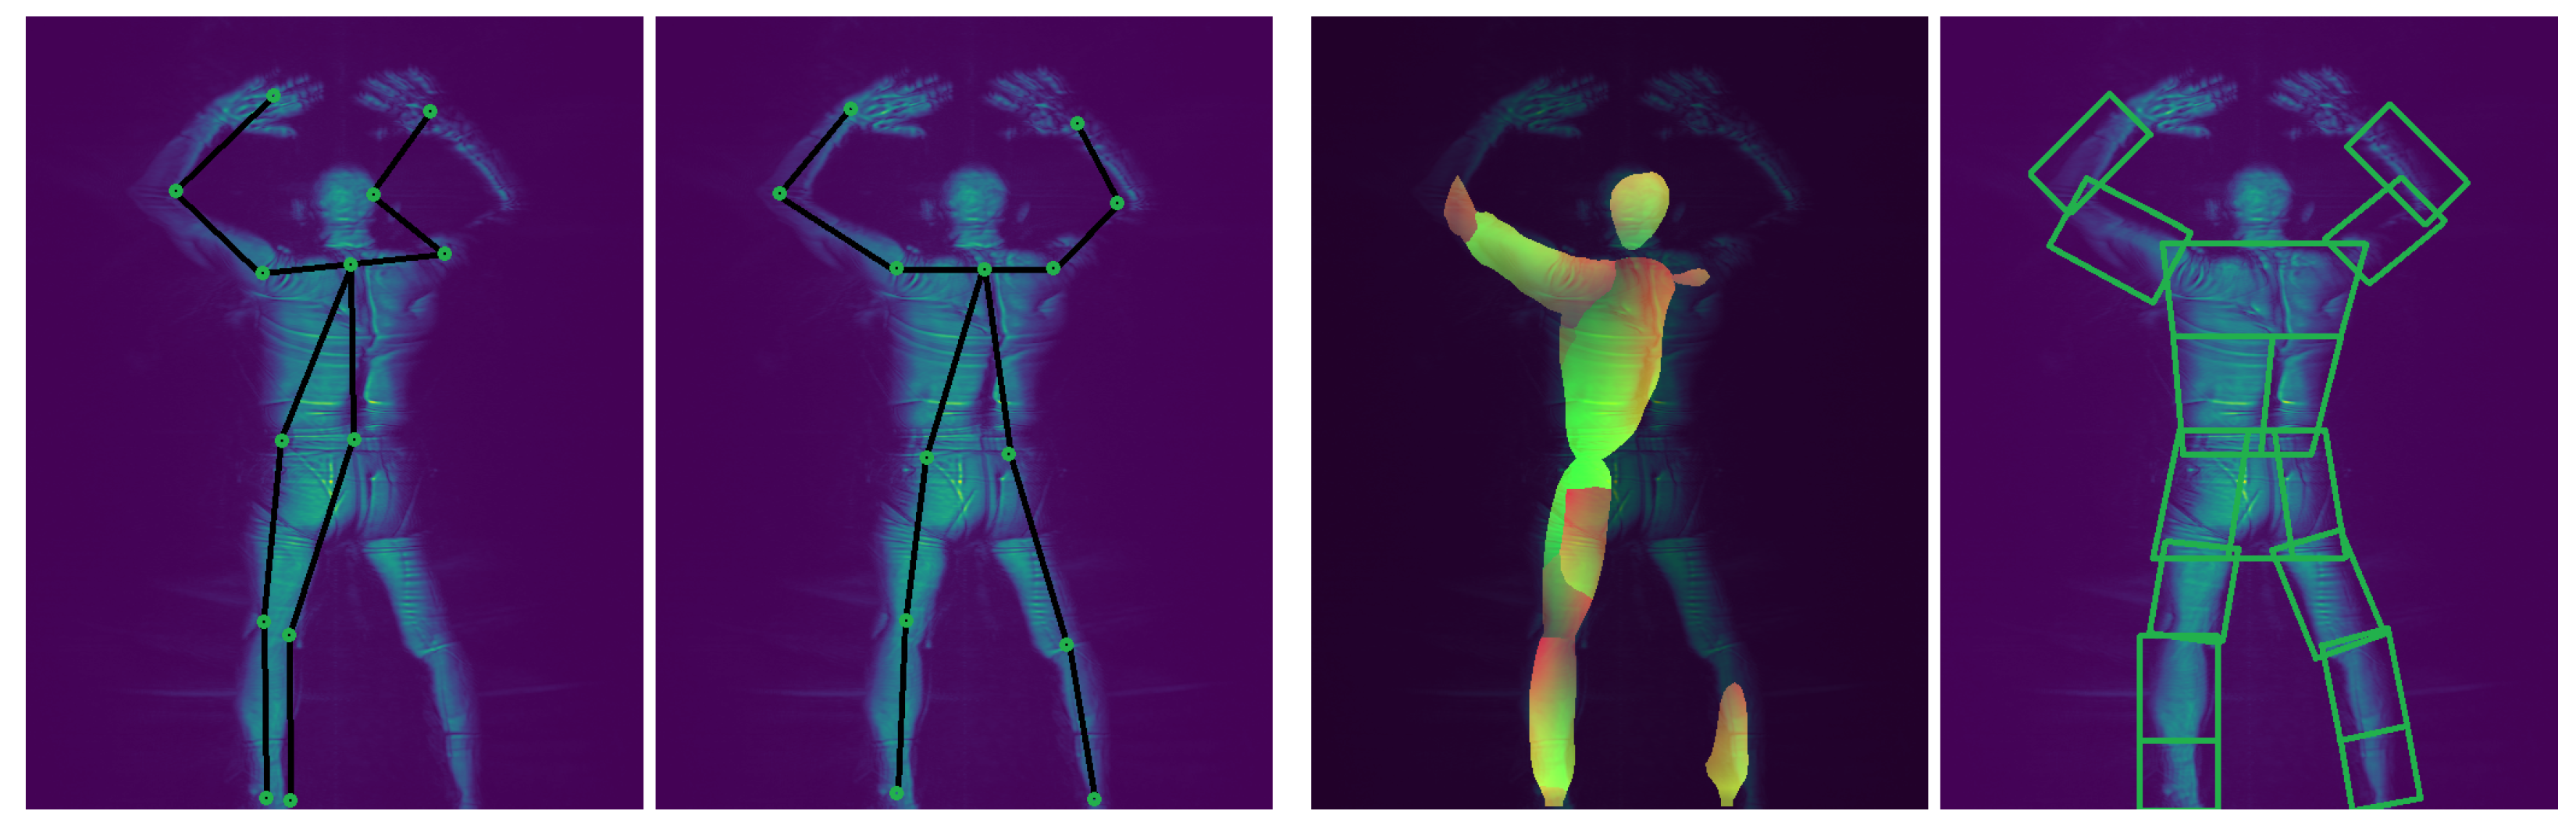 State-of-the-art 2D and 3D human pose estimation services | Upwork